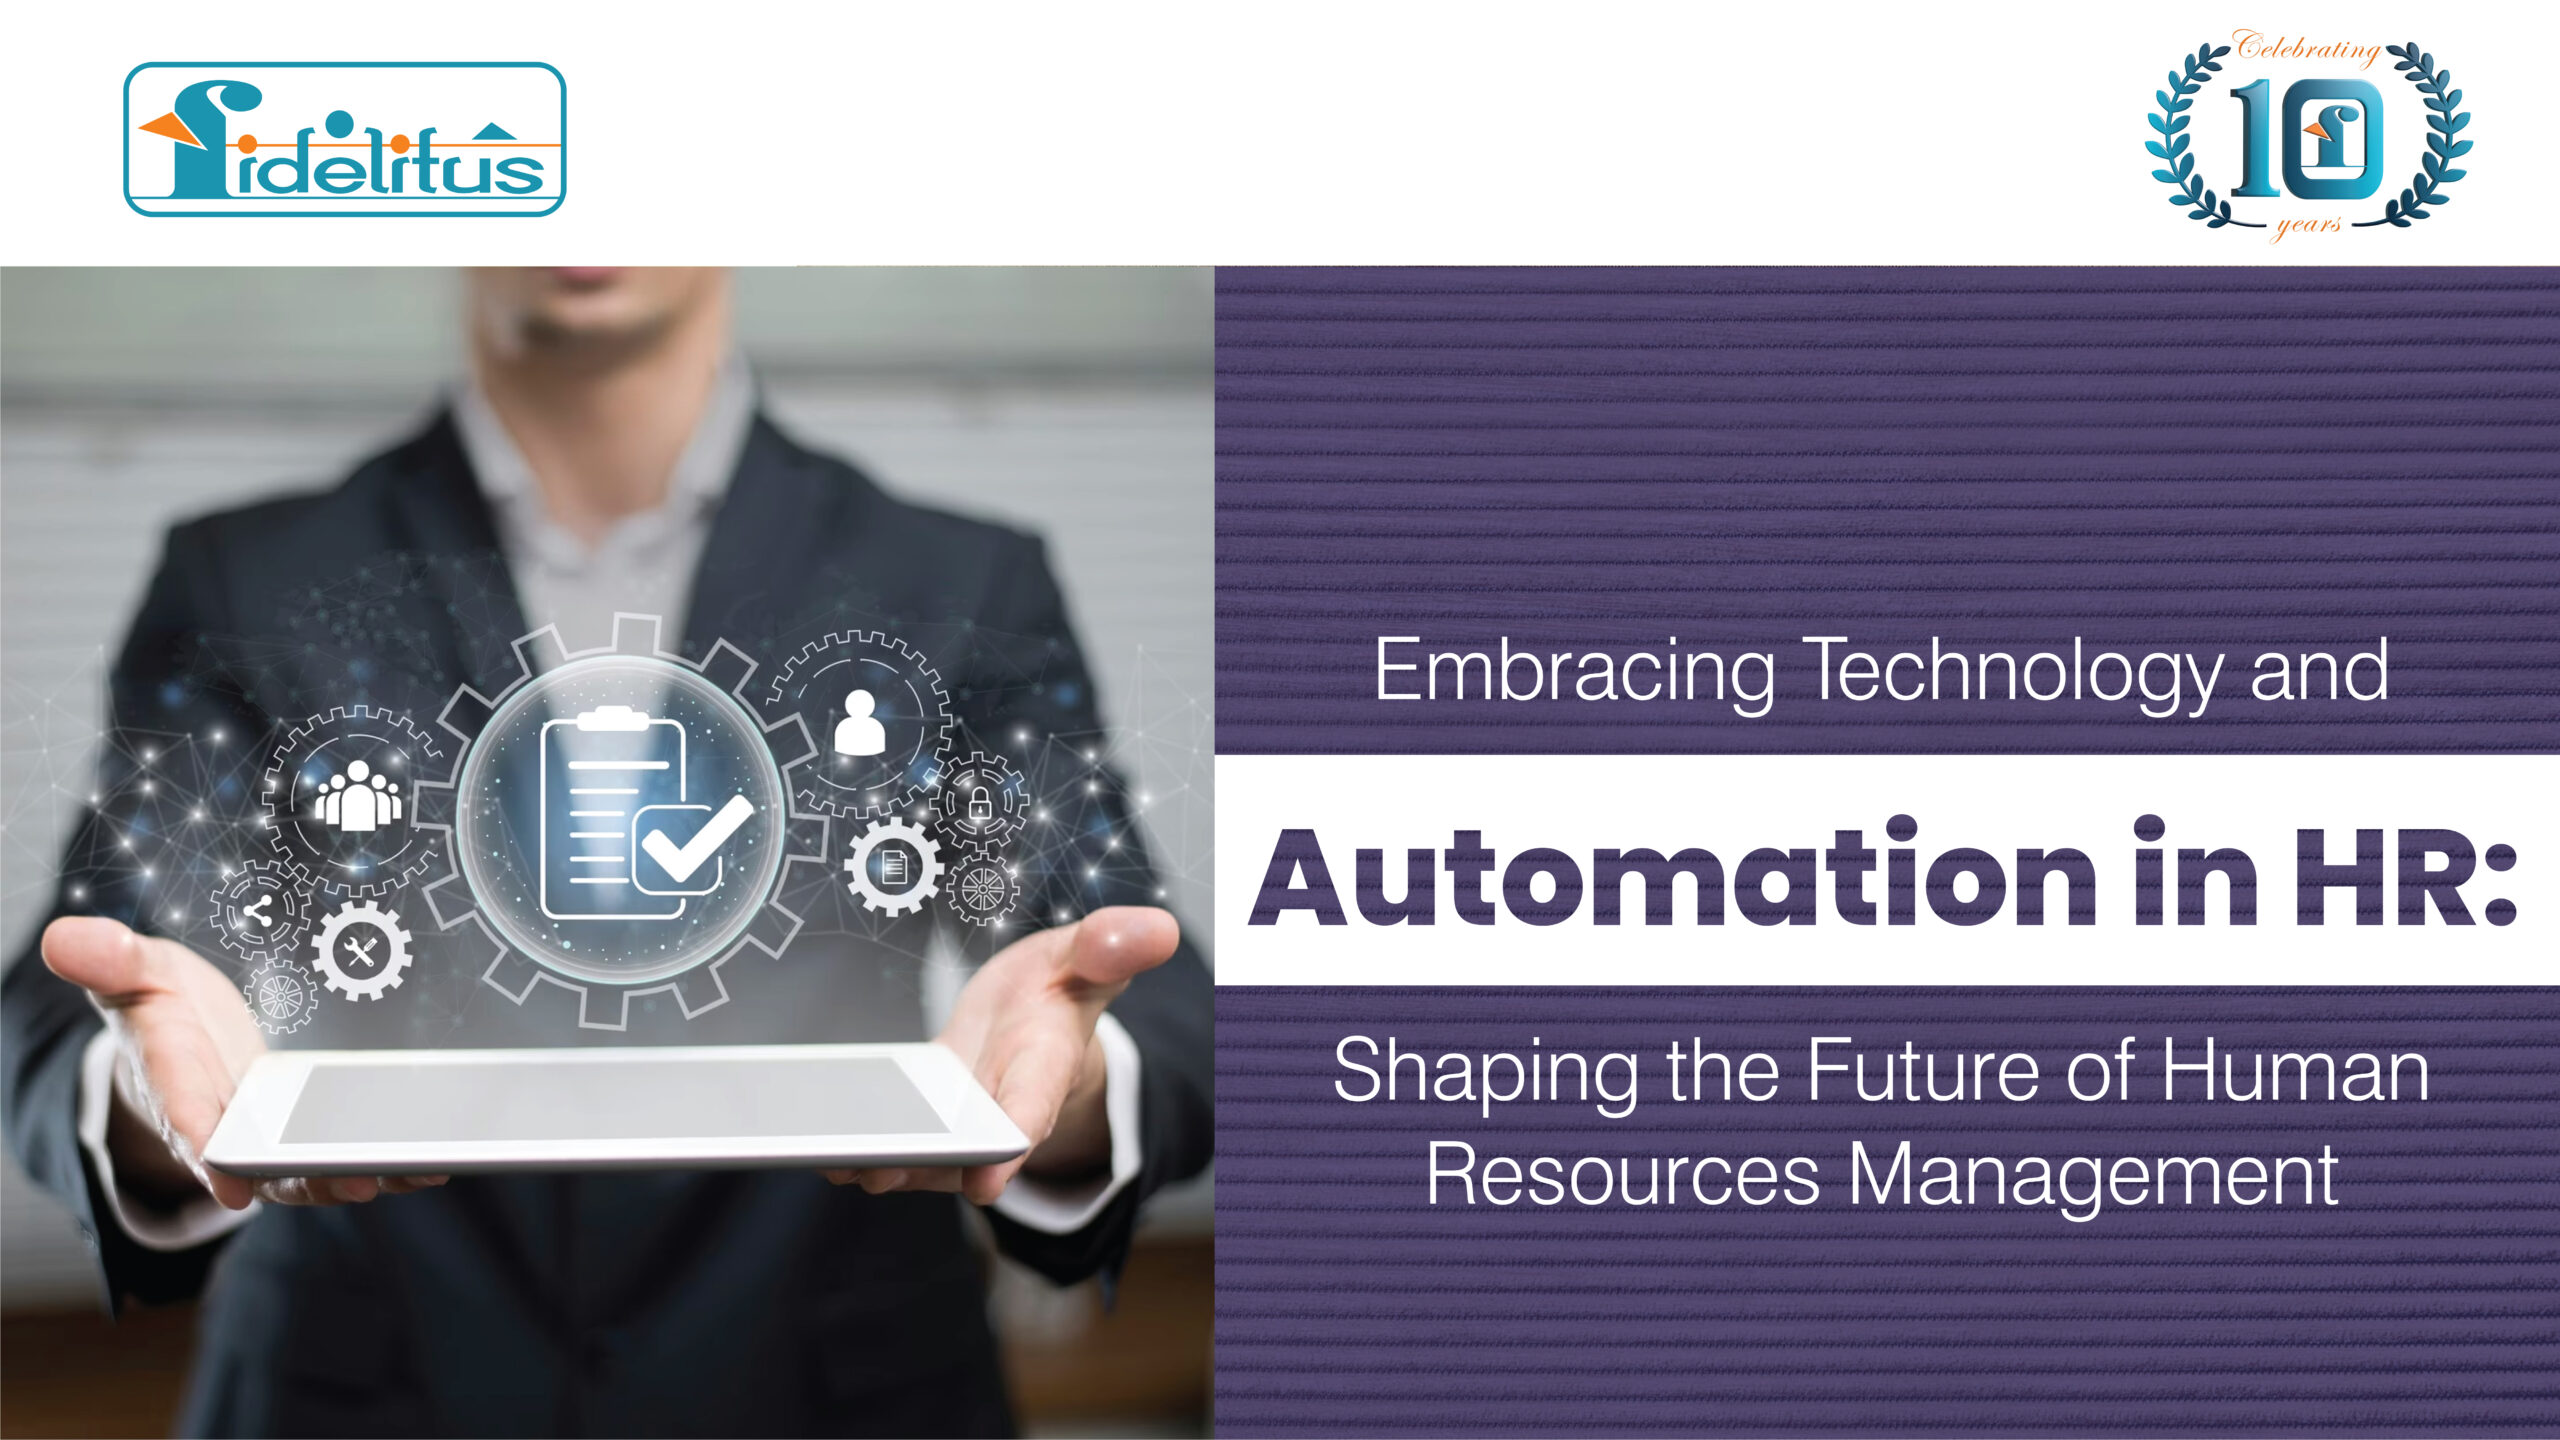 You are currently viewing Embracing Technology and Automation in HR: Shaping the Future of Human Resources Management